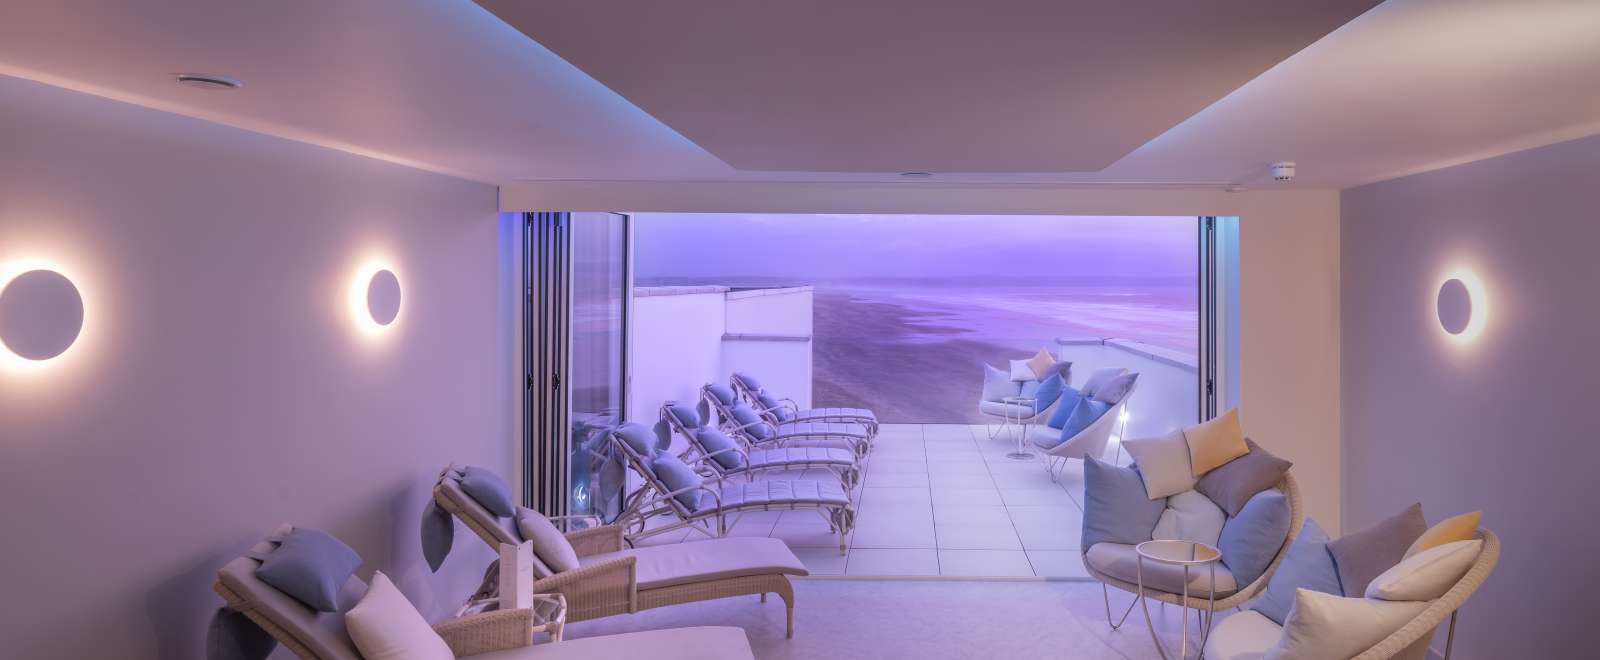 Relaxation Room during twilight spa